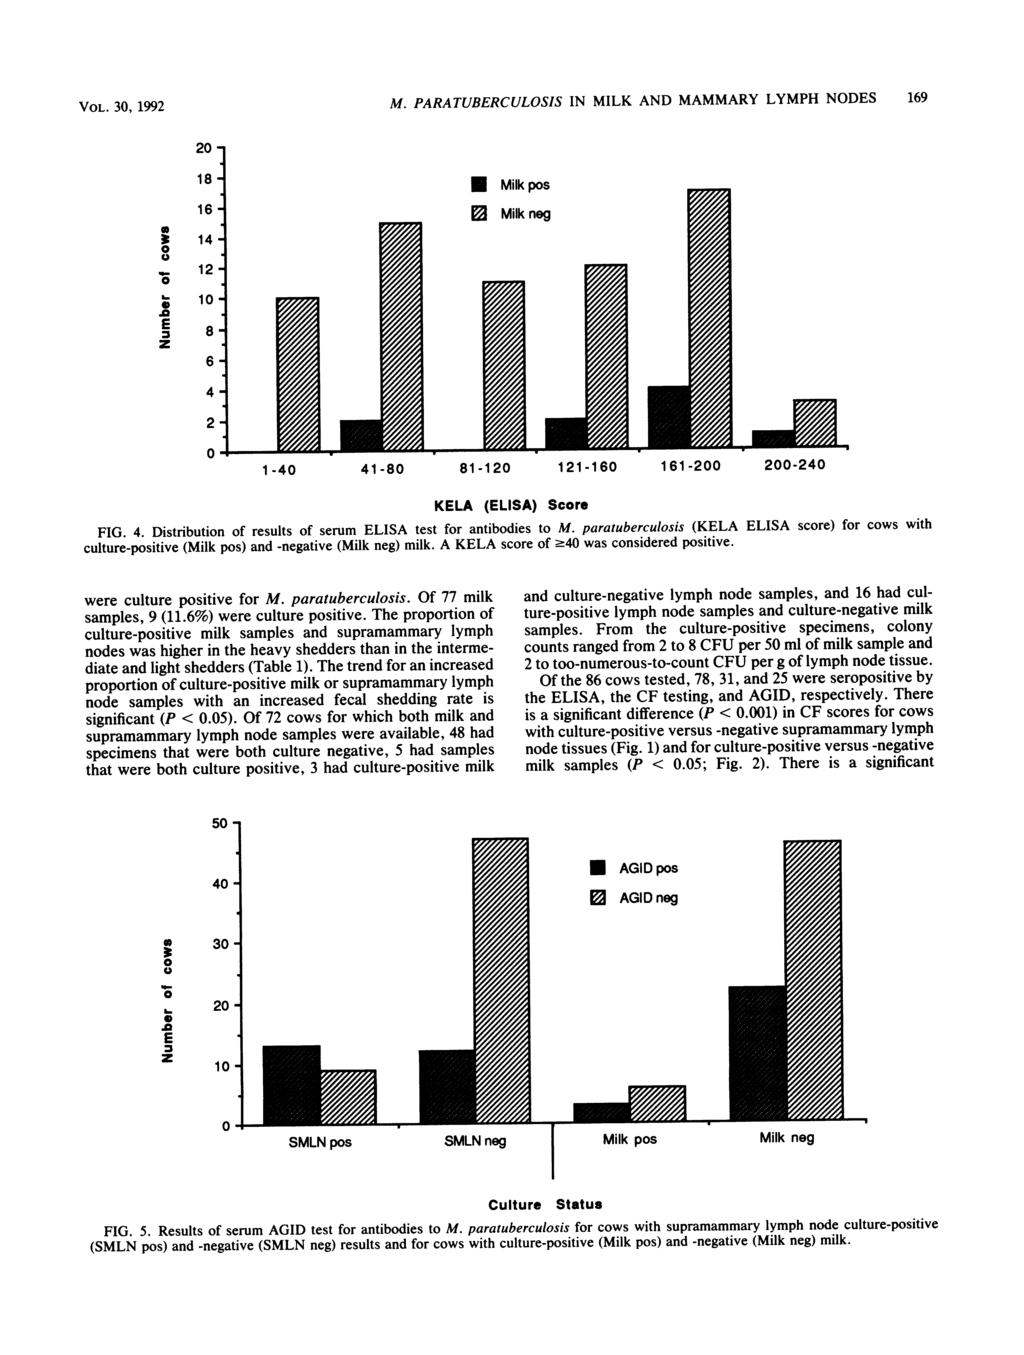 VOL. 3, 1992 M. PARATUBERCULOSIS IN MILK AND MAMMARY LYMPH NODES 9 U. E 2 14 1 8 6 4 1-4 41-8 81-1- 1-2 2-24 KELA (ELISA) Score FIG. 4. Distribution of results of serum ELISA test for ntibodies to M.